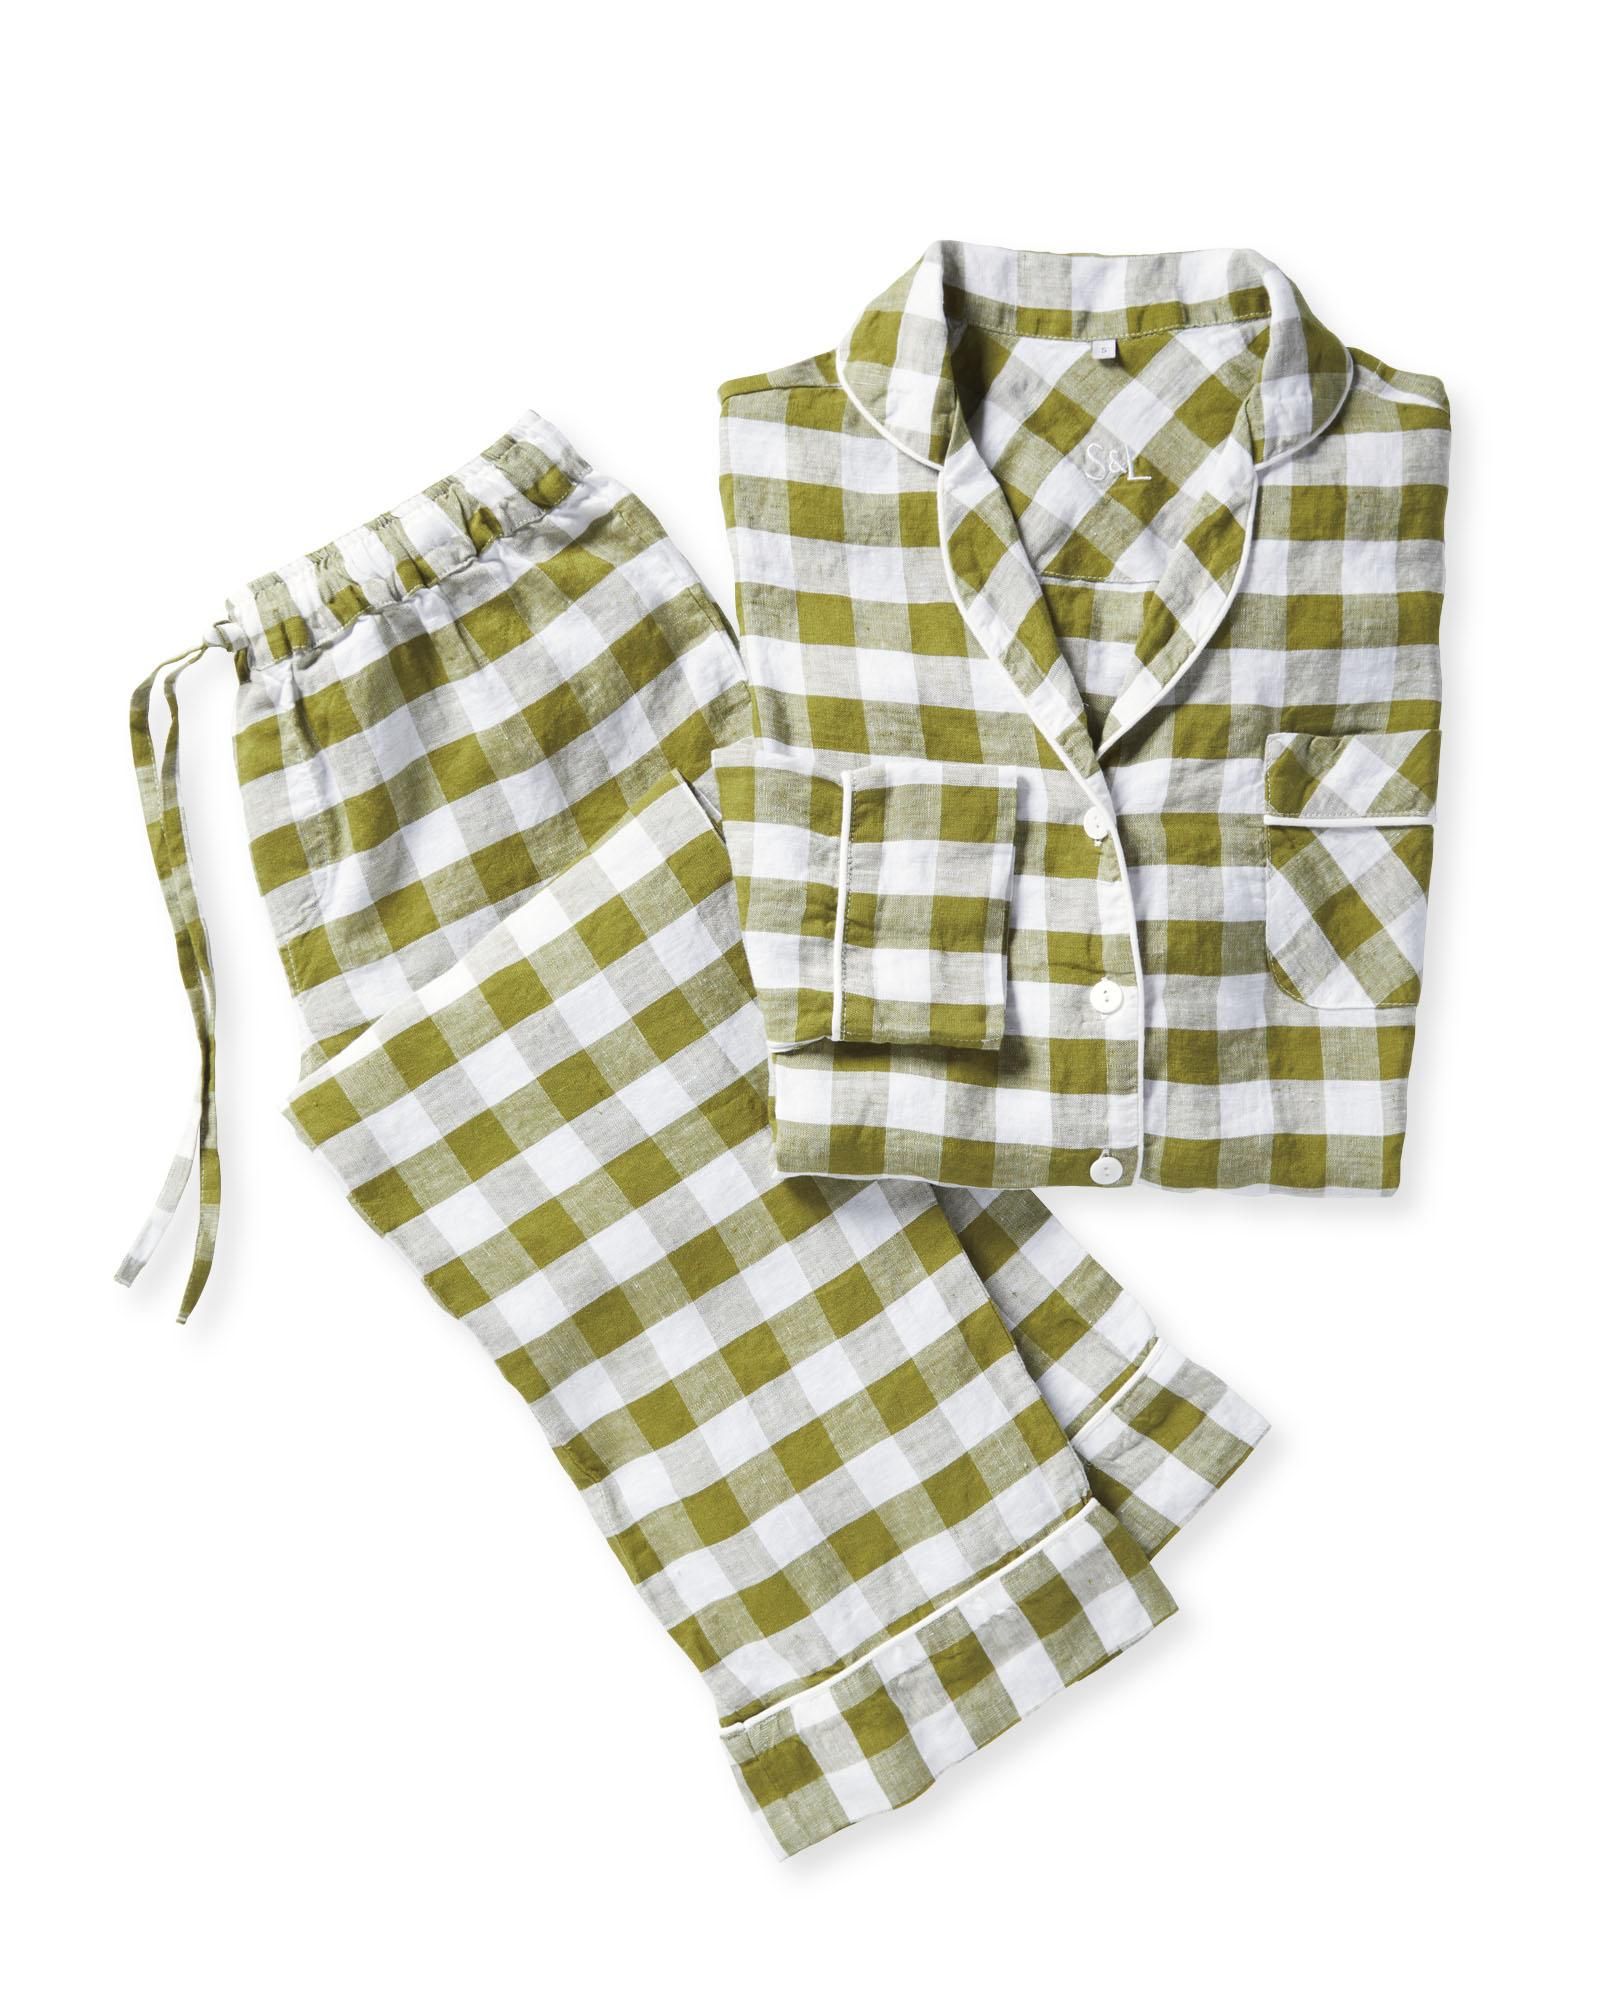 Hyannis Linen Pajamas | Serena and Lily